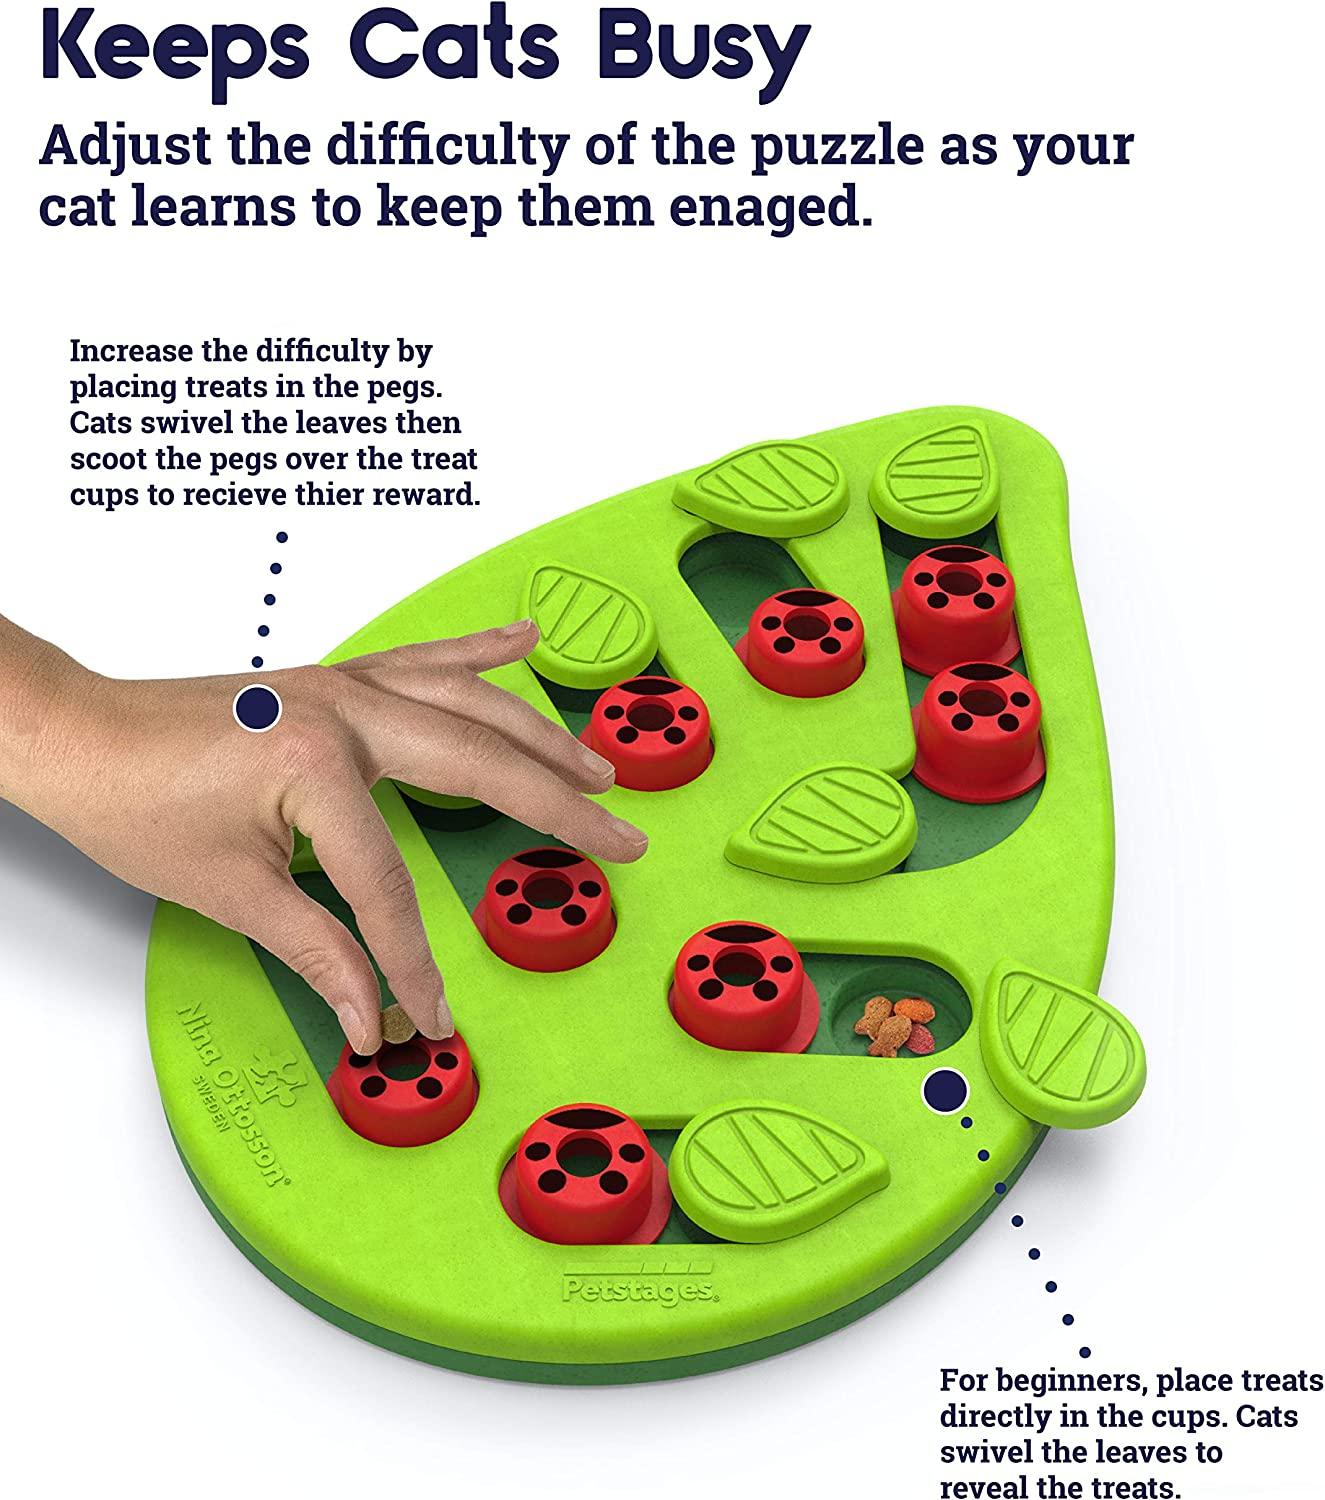 Petstages Interactive Cat Puzzles, Slow Feeders, and Treat